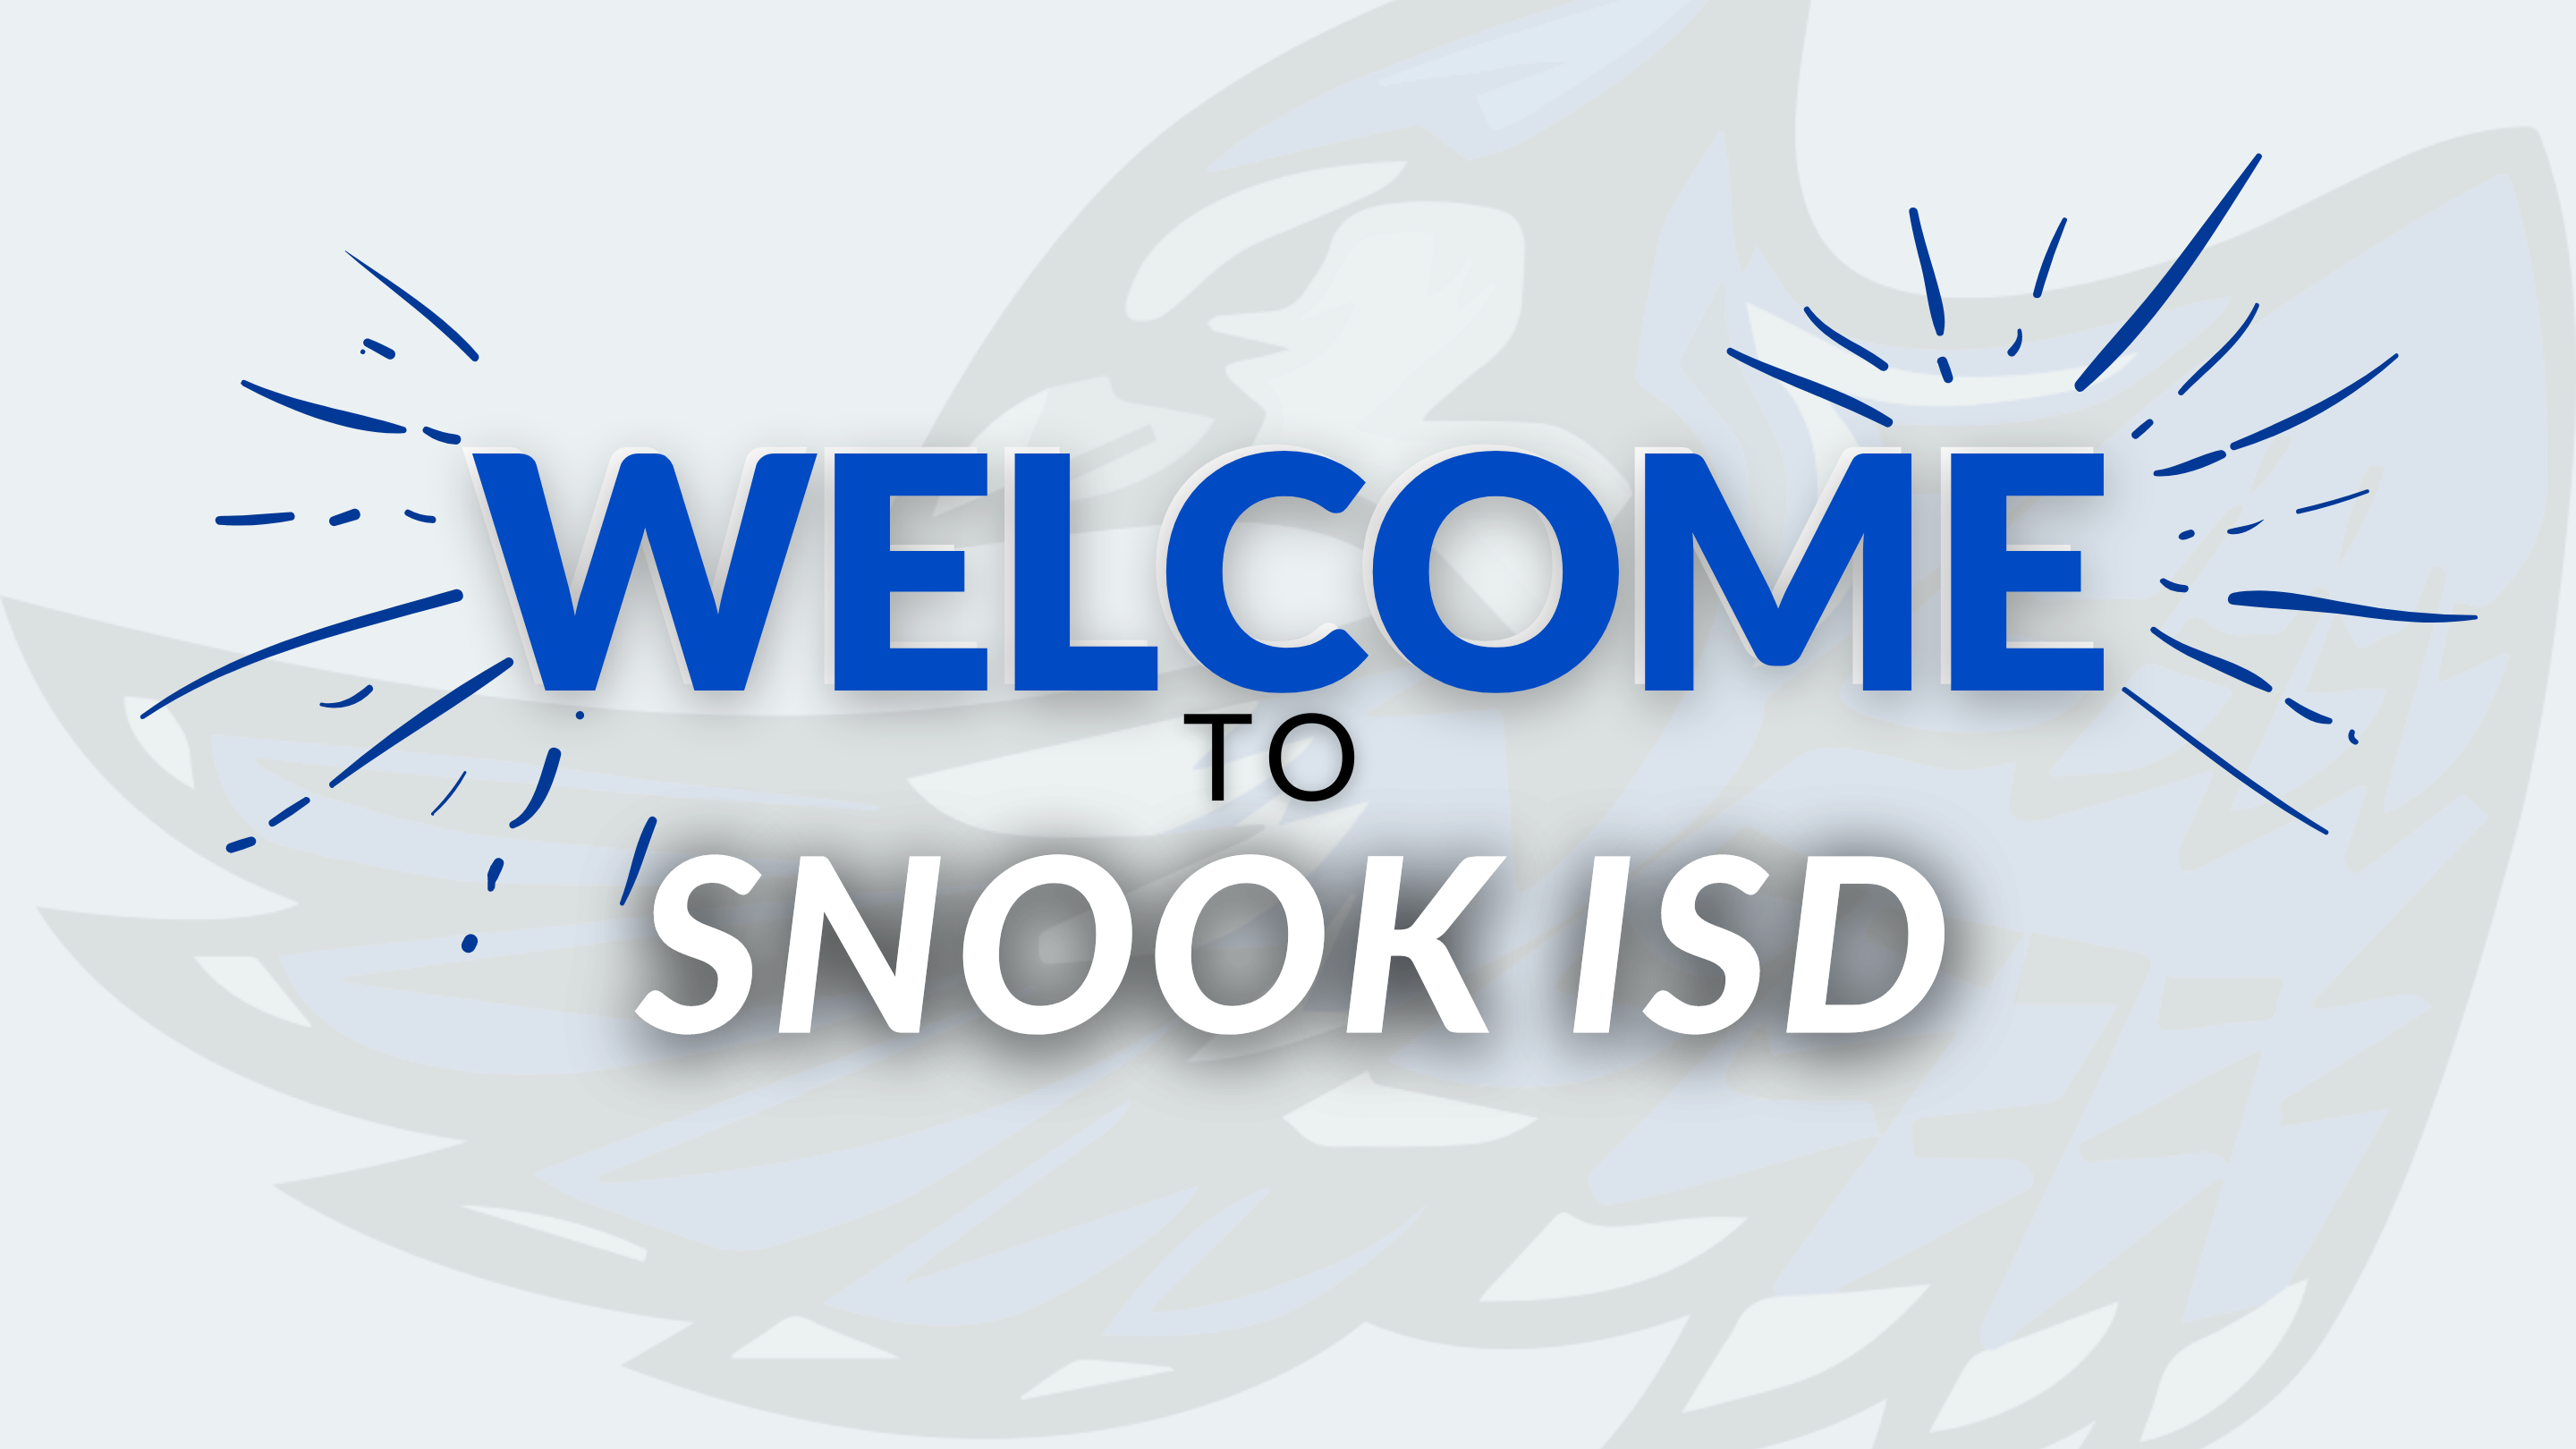 Snook ISD Where Each Student is Encouraged and Empowered to Excel